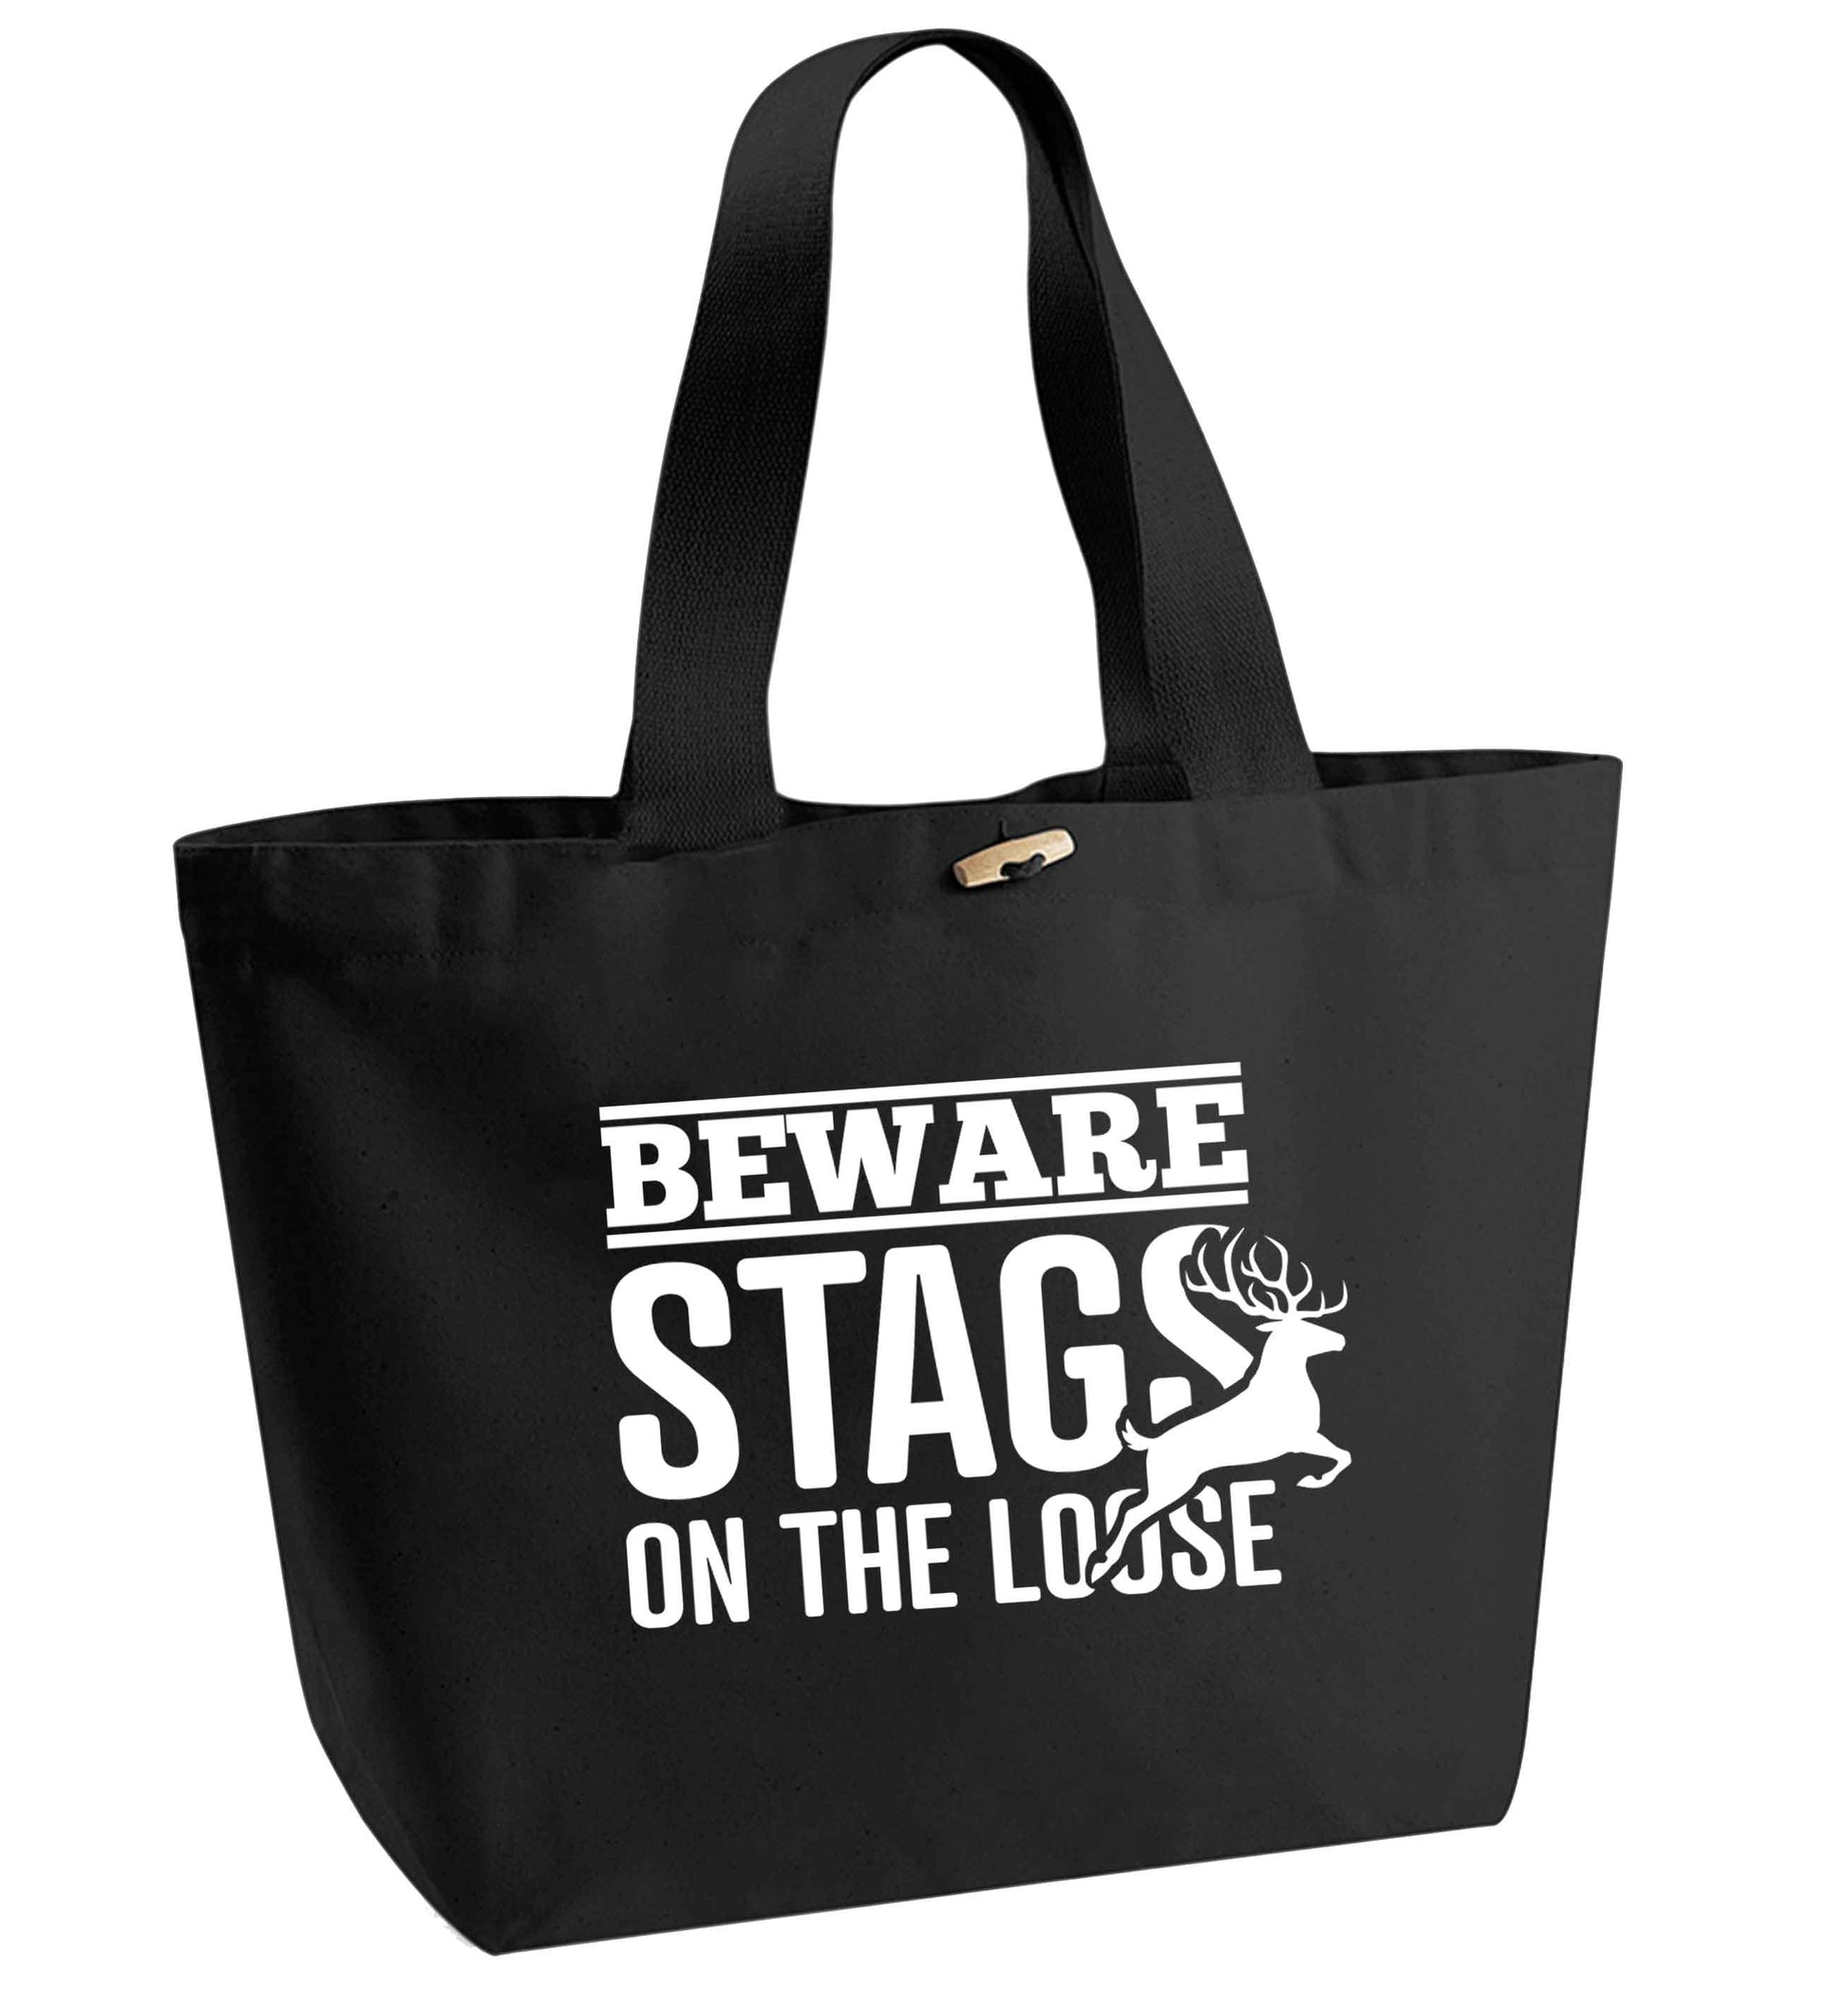 Beware stags on the loose organic cotton premium tote bag with wooden toggle in black